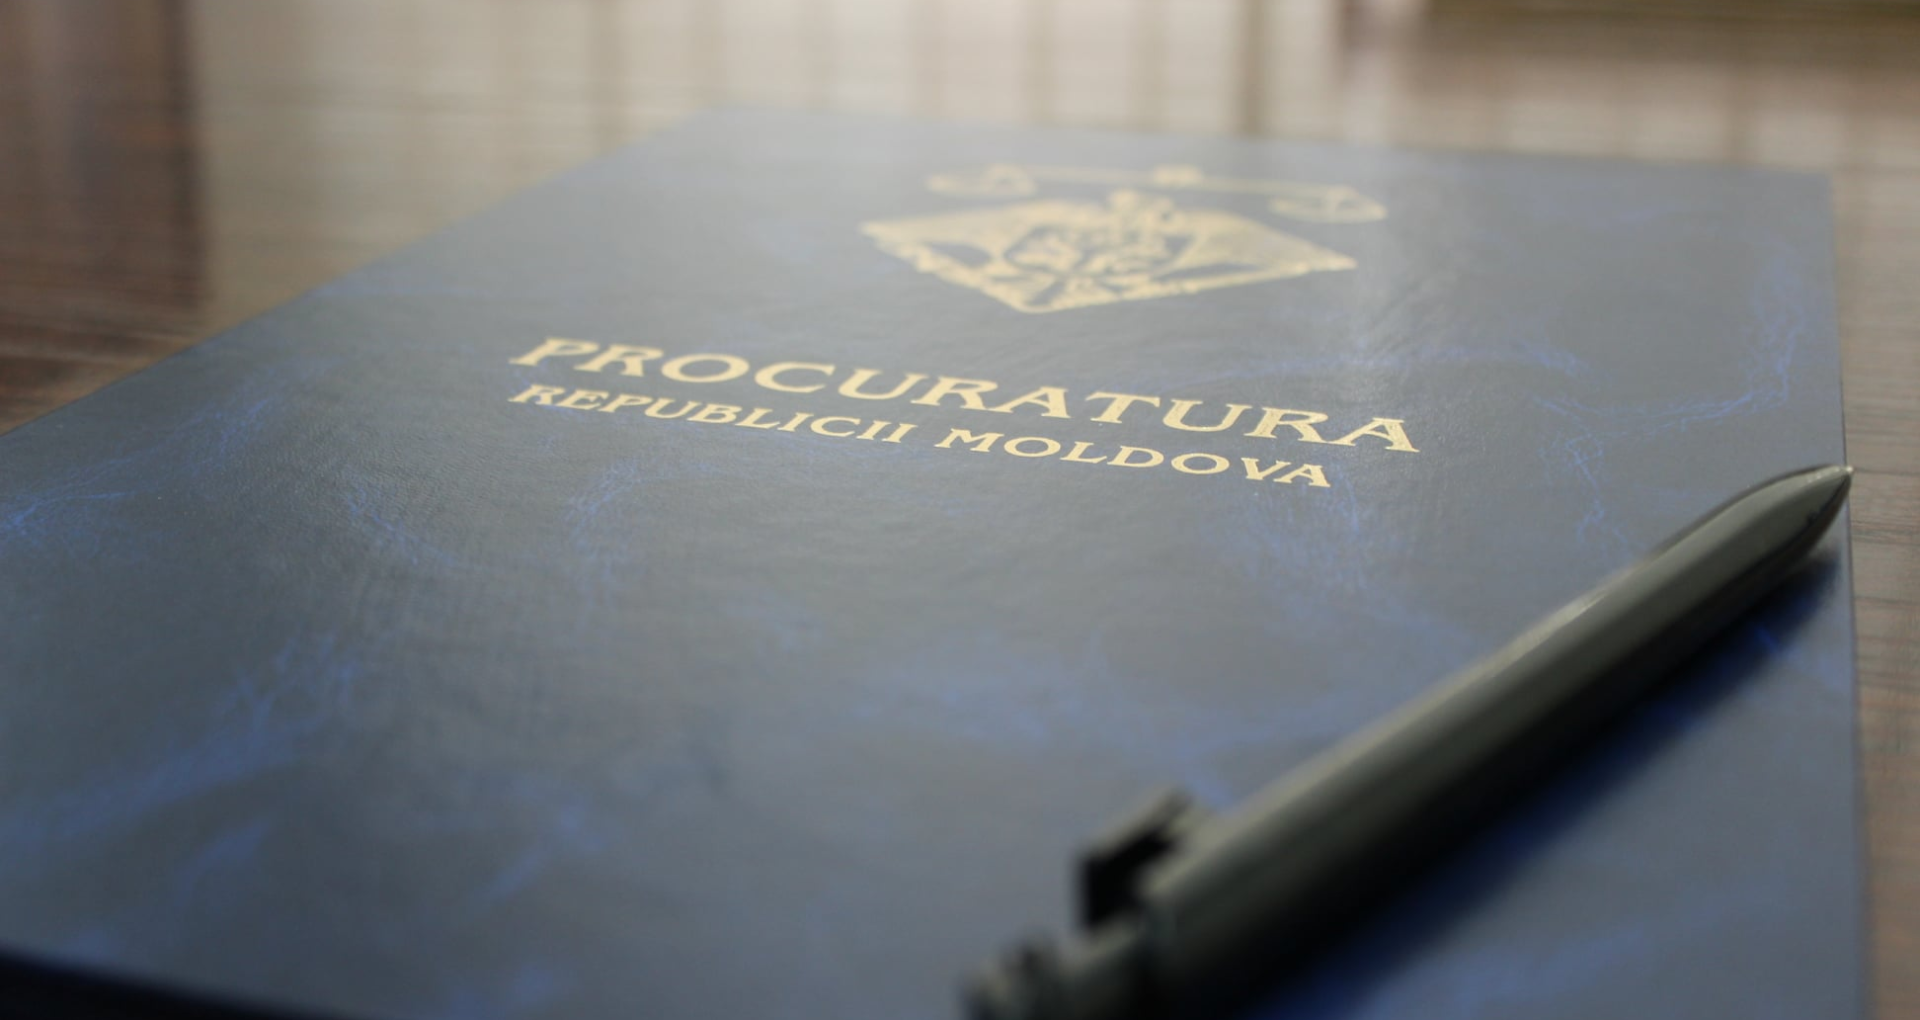 The Venice Commission has expressed its views on the Draft Law on De-oligarchisation of Moldova